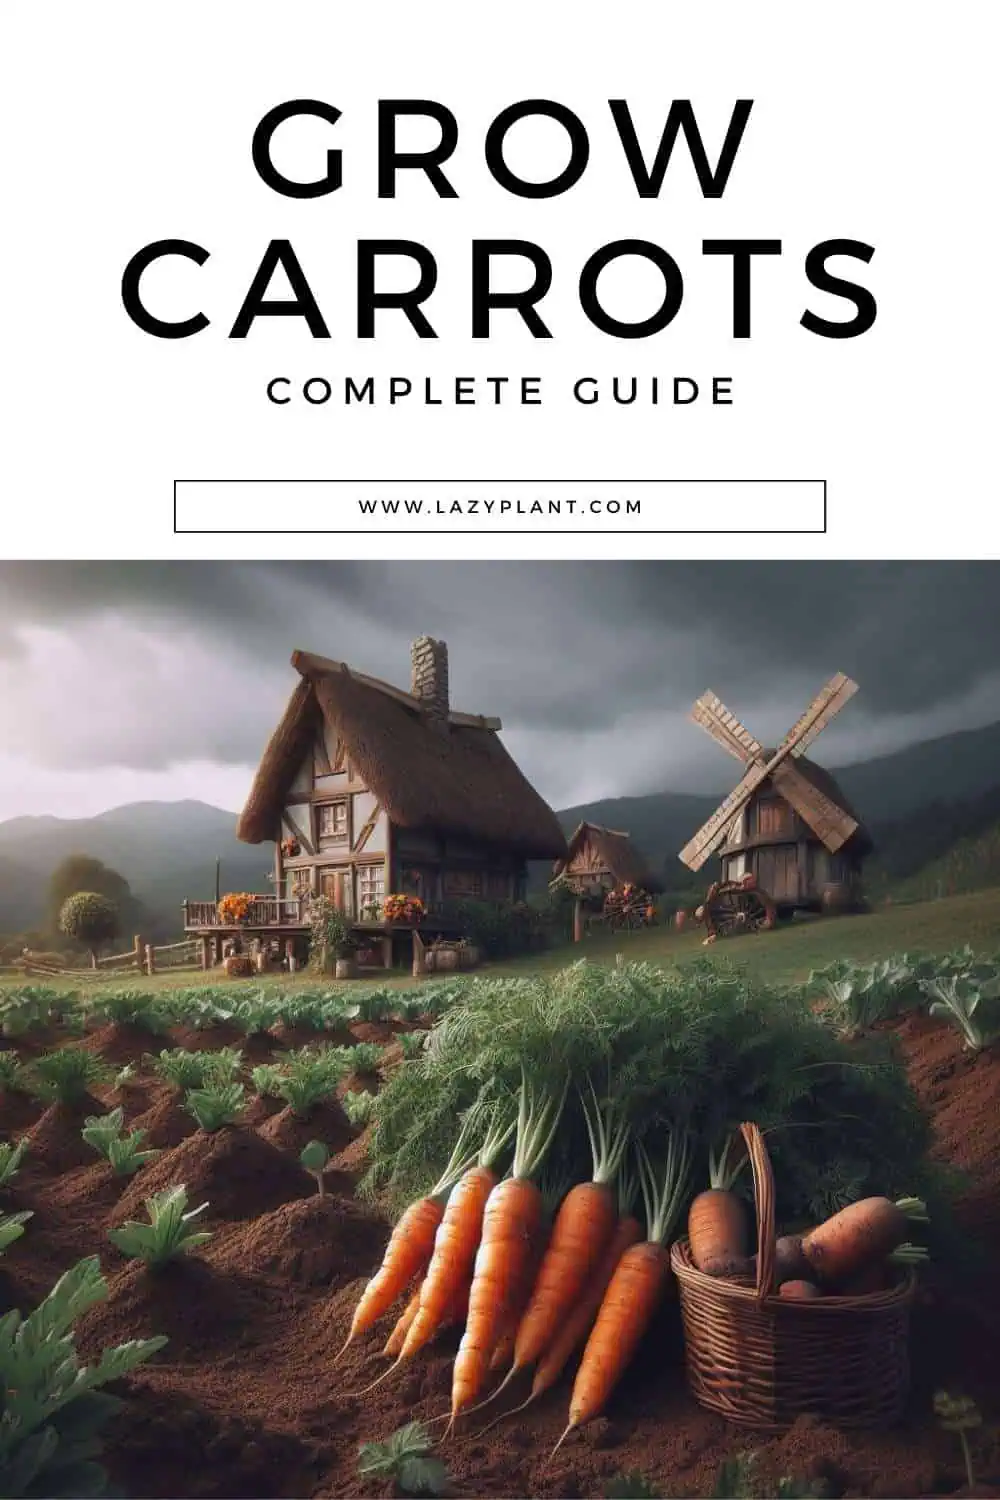 Carrot Cultivation – The Complete Guide for Beginner Gardeners